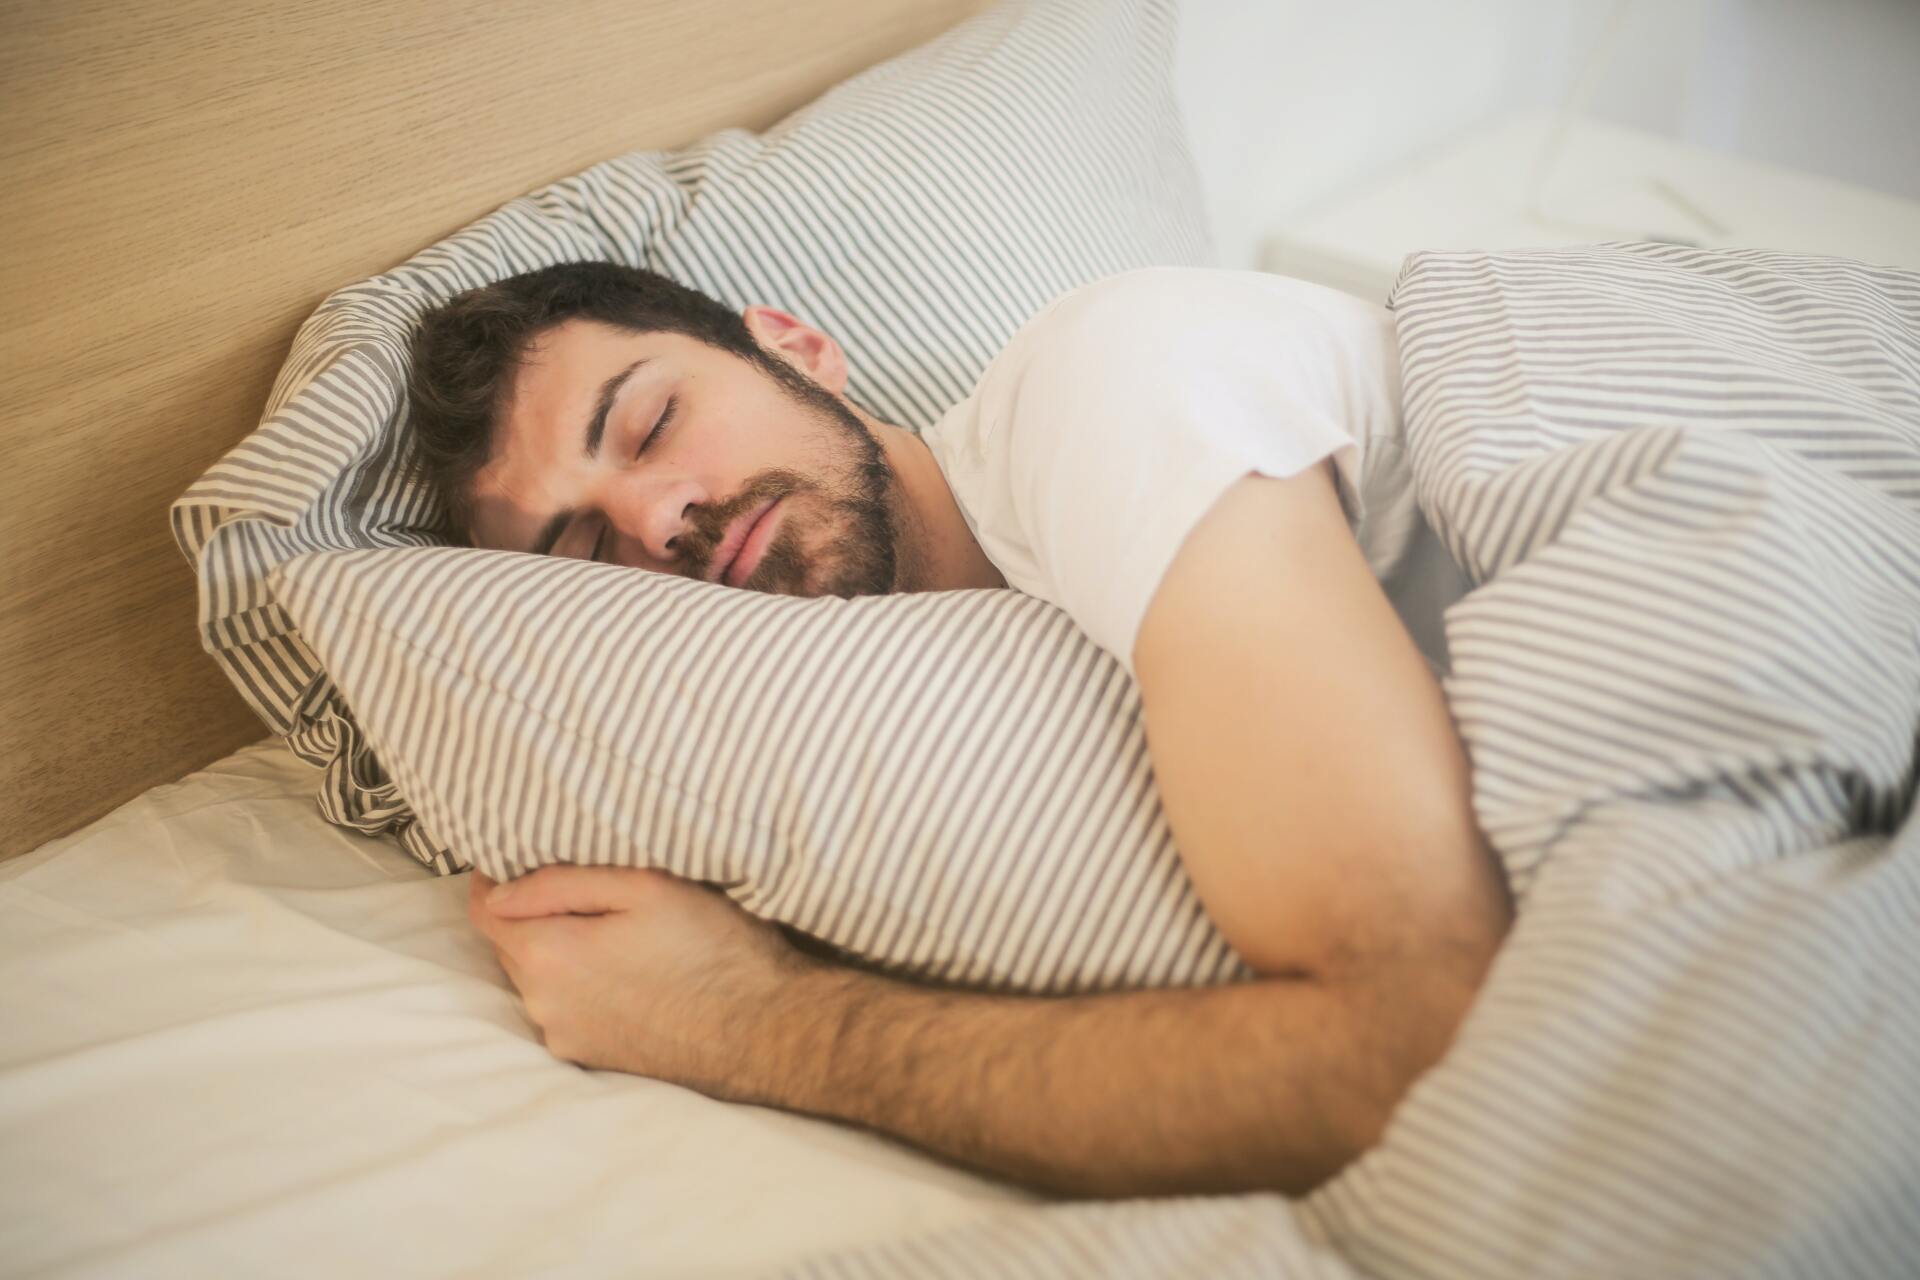 photo of a person sleeping in bed